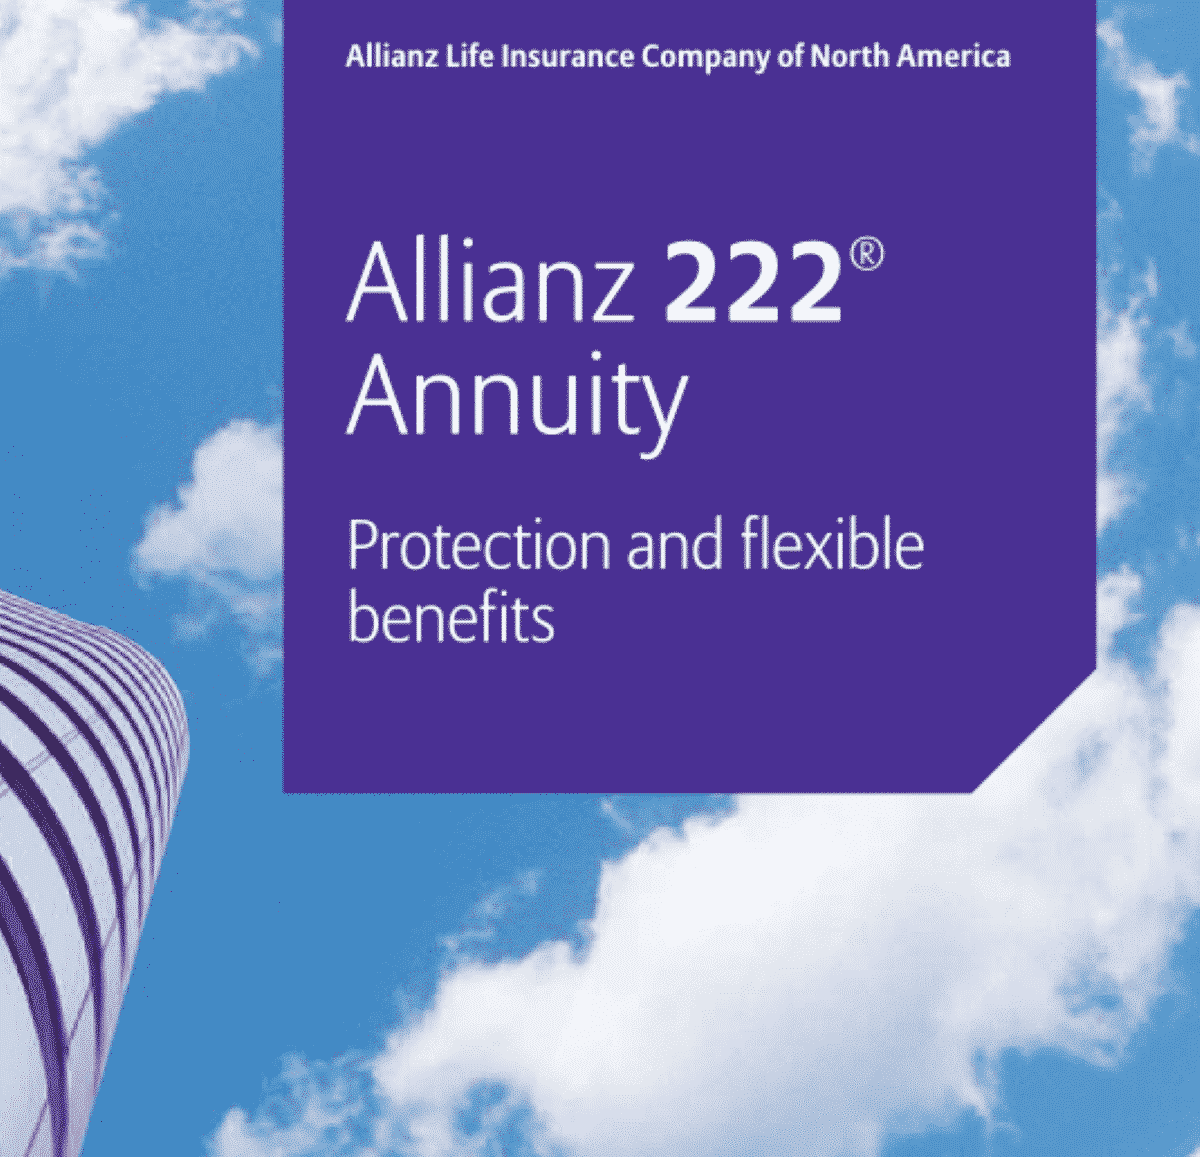 Allianz 222 Brochure Cover: Featured Image of Allianz 222 Review by My Annuity Store, Inc.